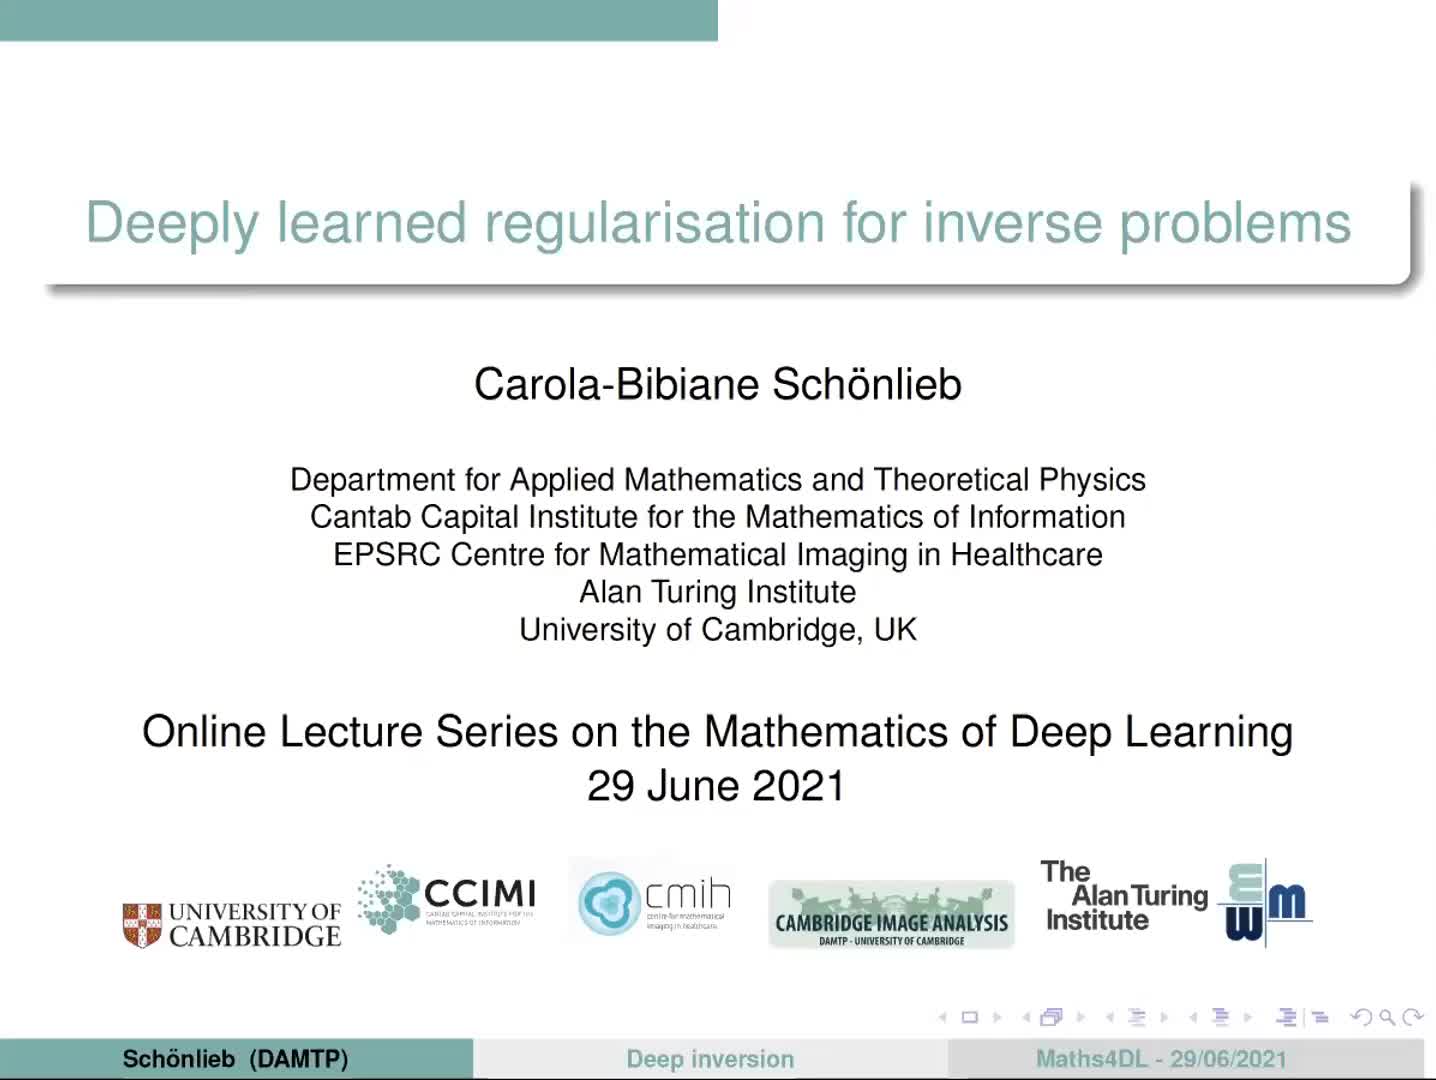 Deeply learned regularisation for inverse problems preview image